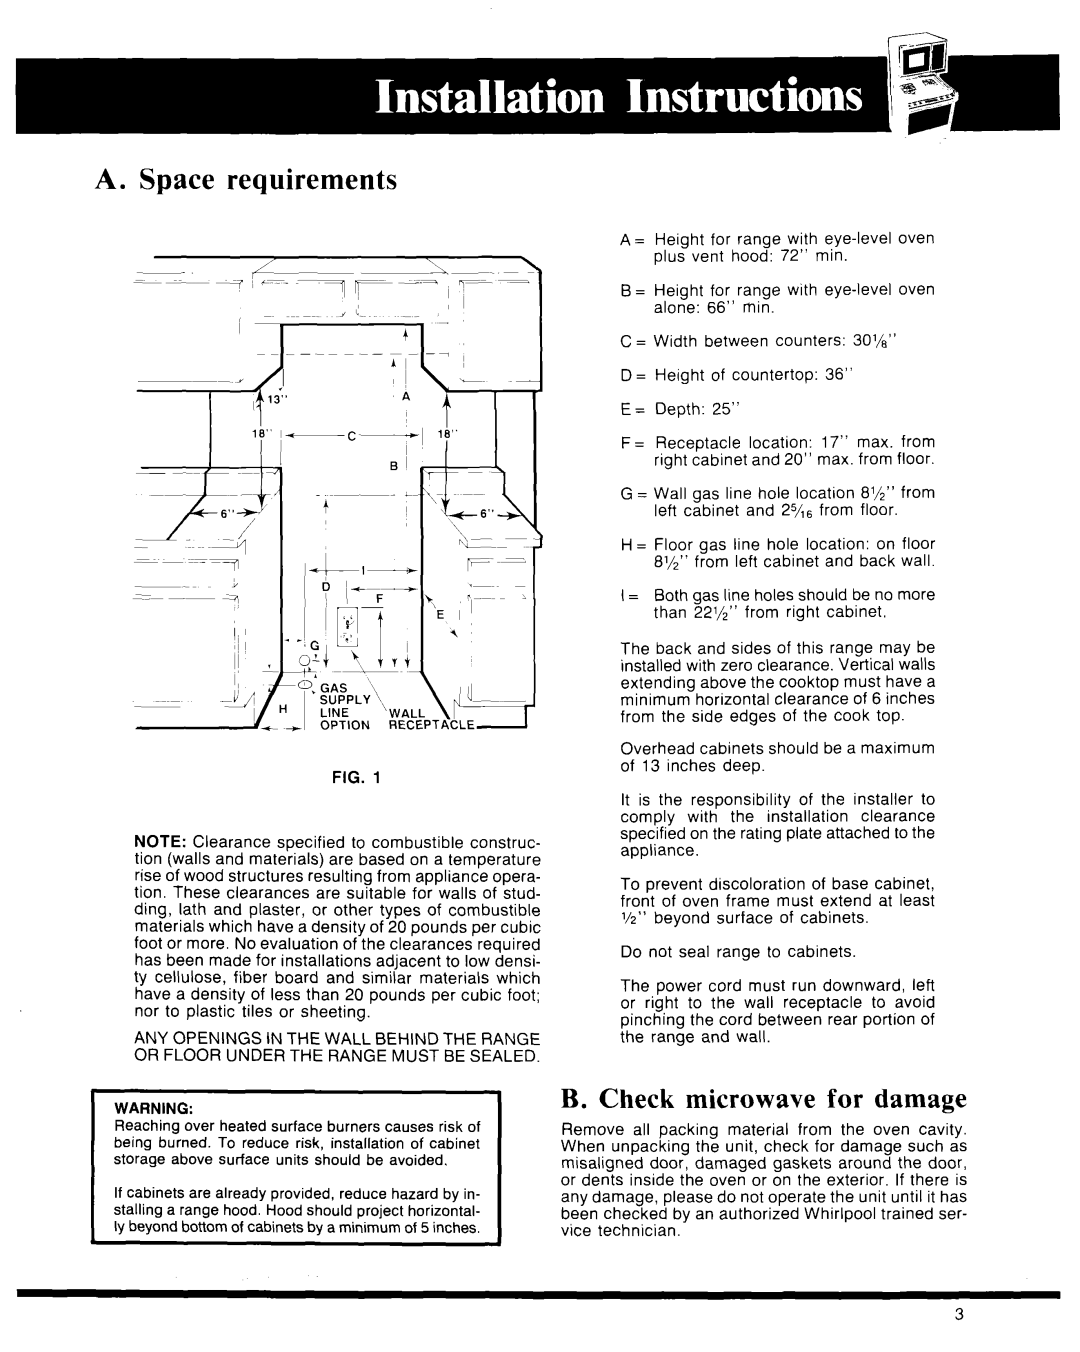 Whirlpool Microwave Oven manual A. Space requirements, B. Check microwave for damage 